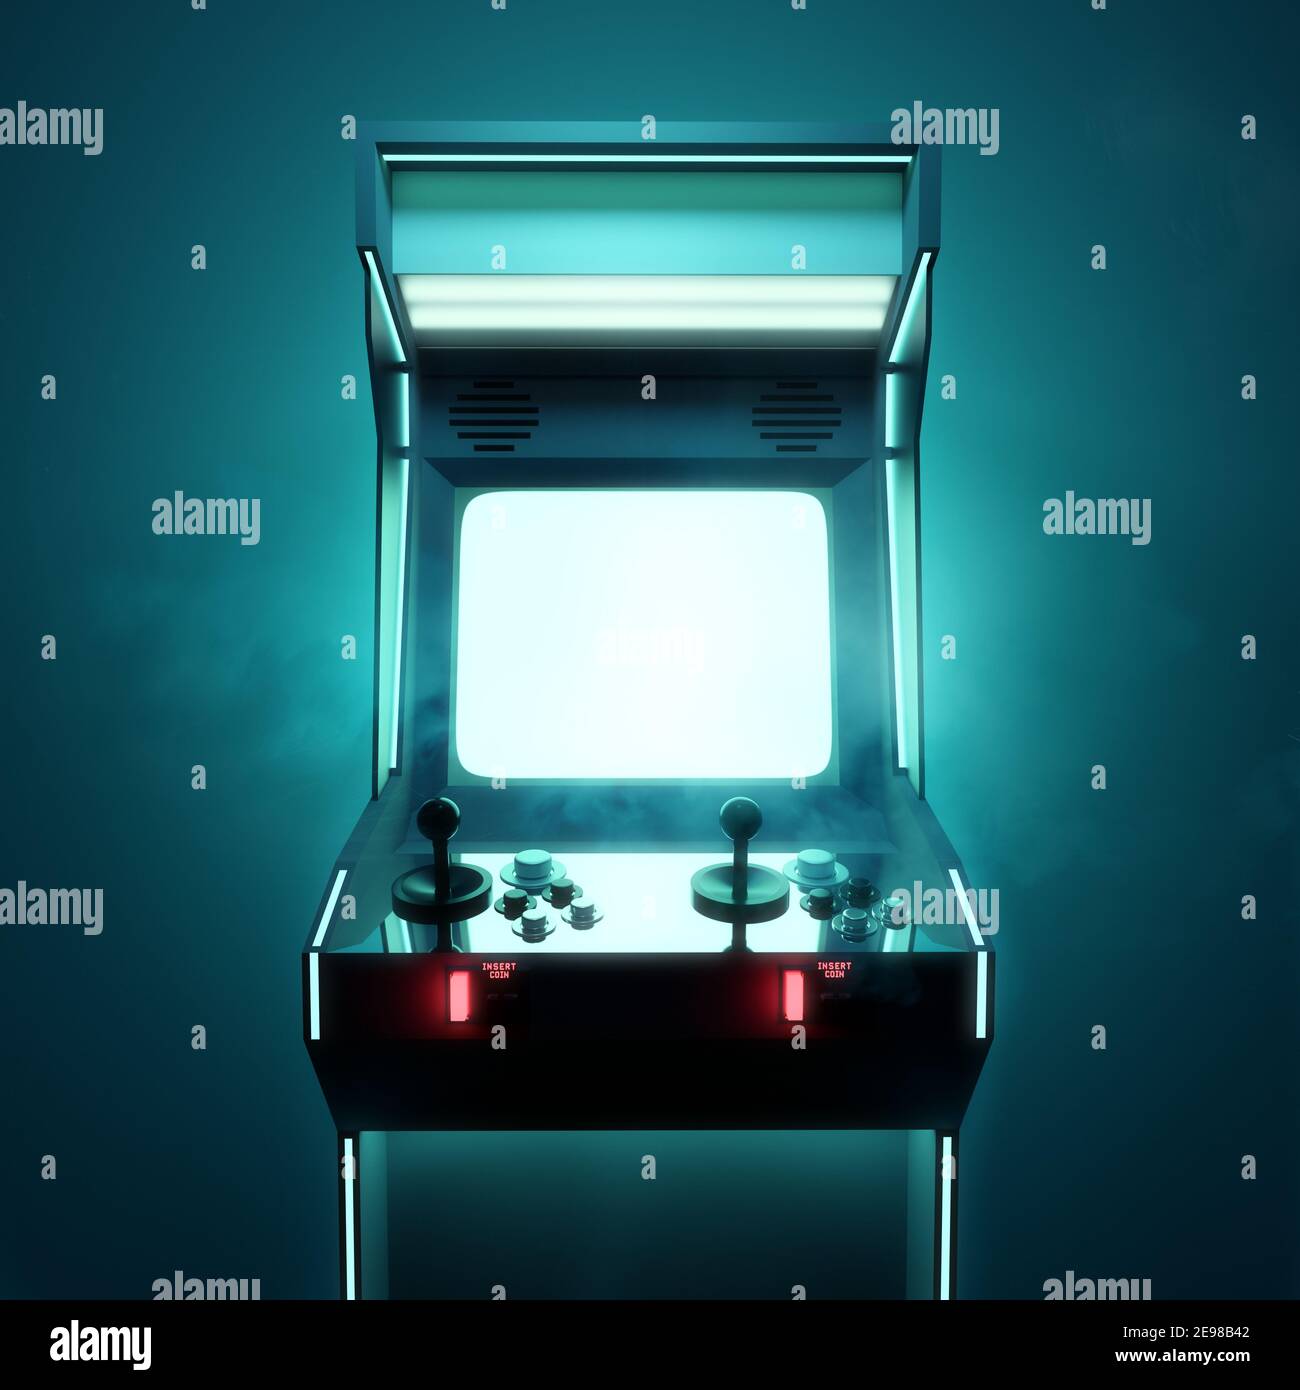 A retro video games arcade fighting machine for two players, with a large blank screen. 3D render illustration. Stock Photo